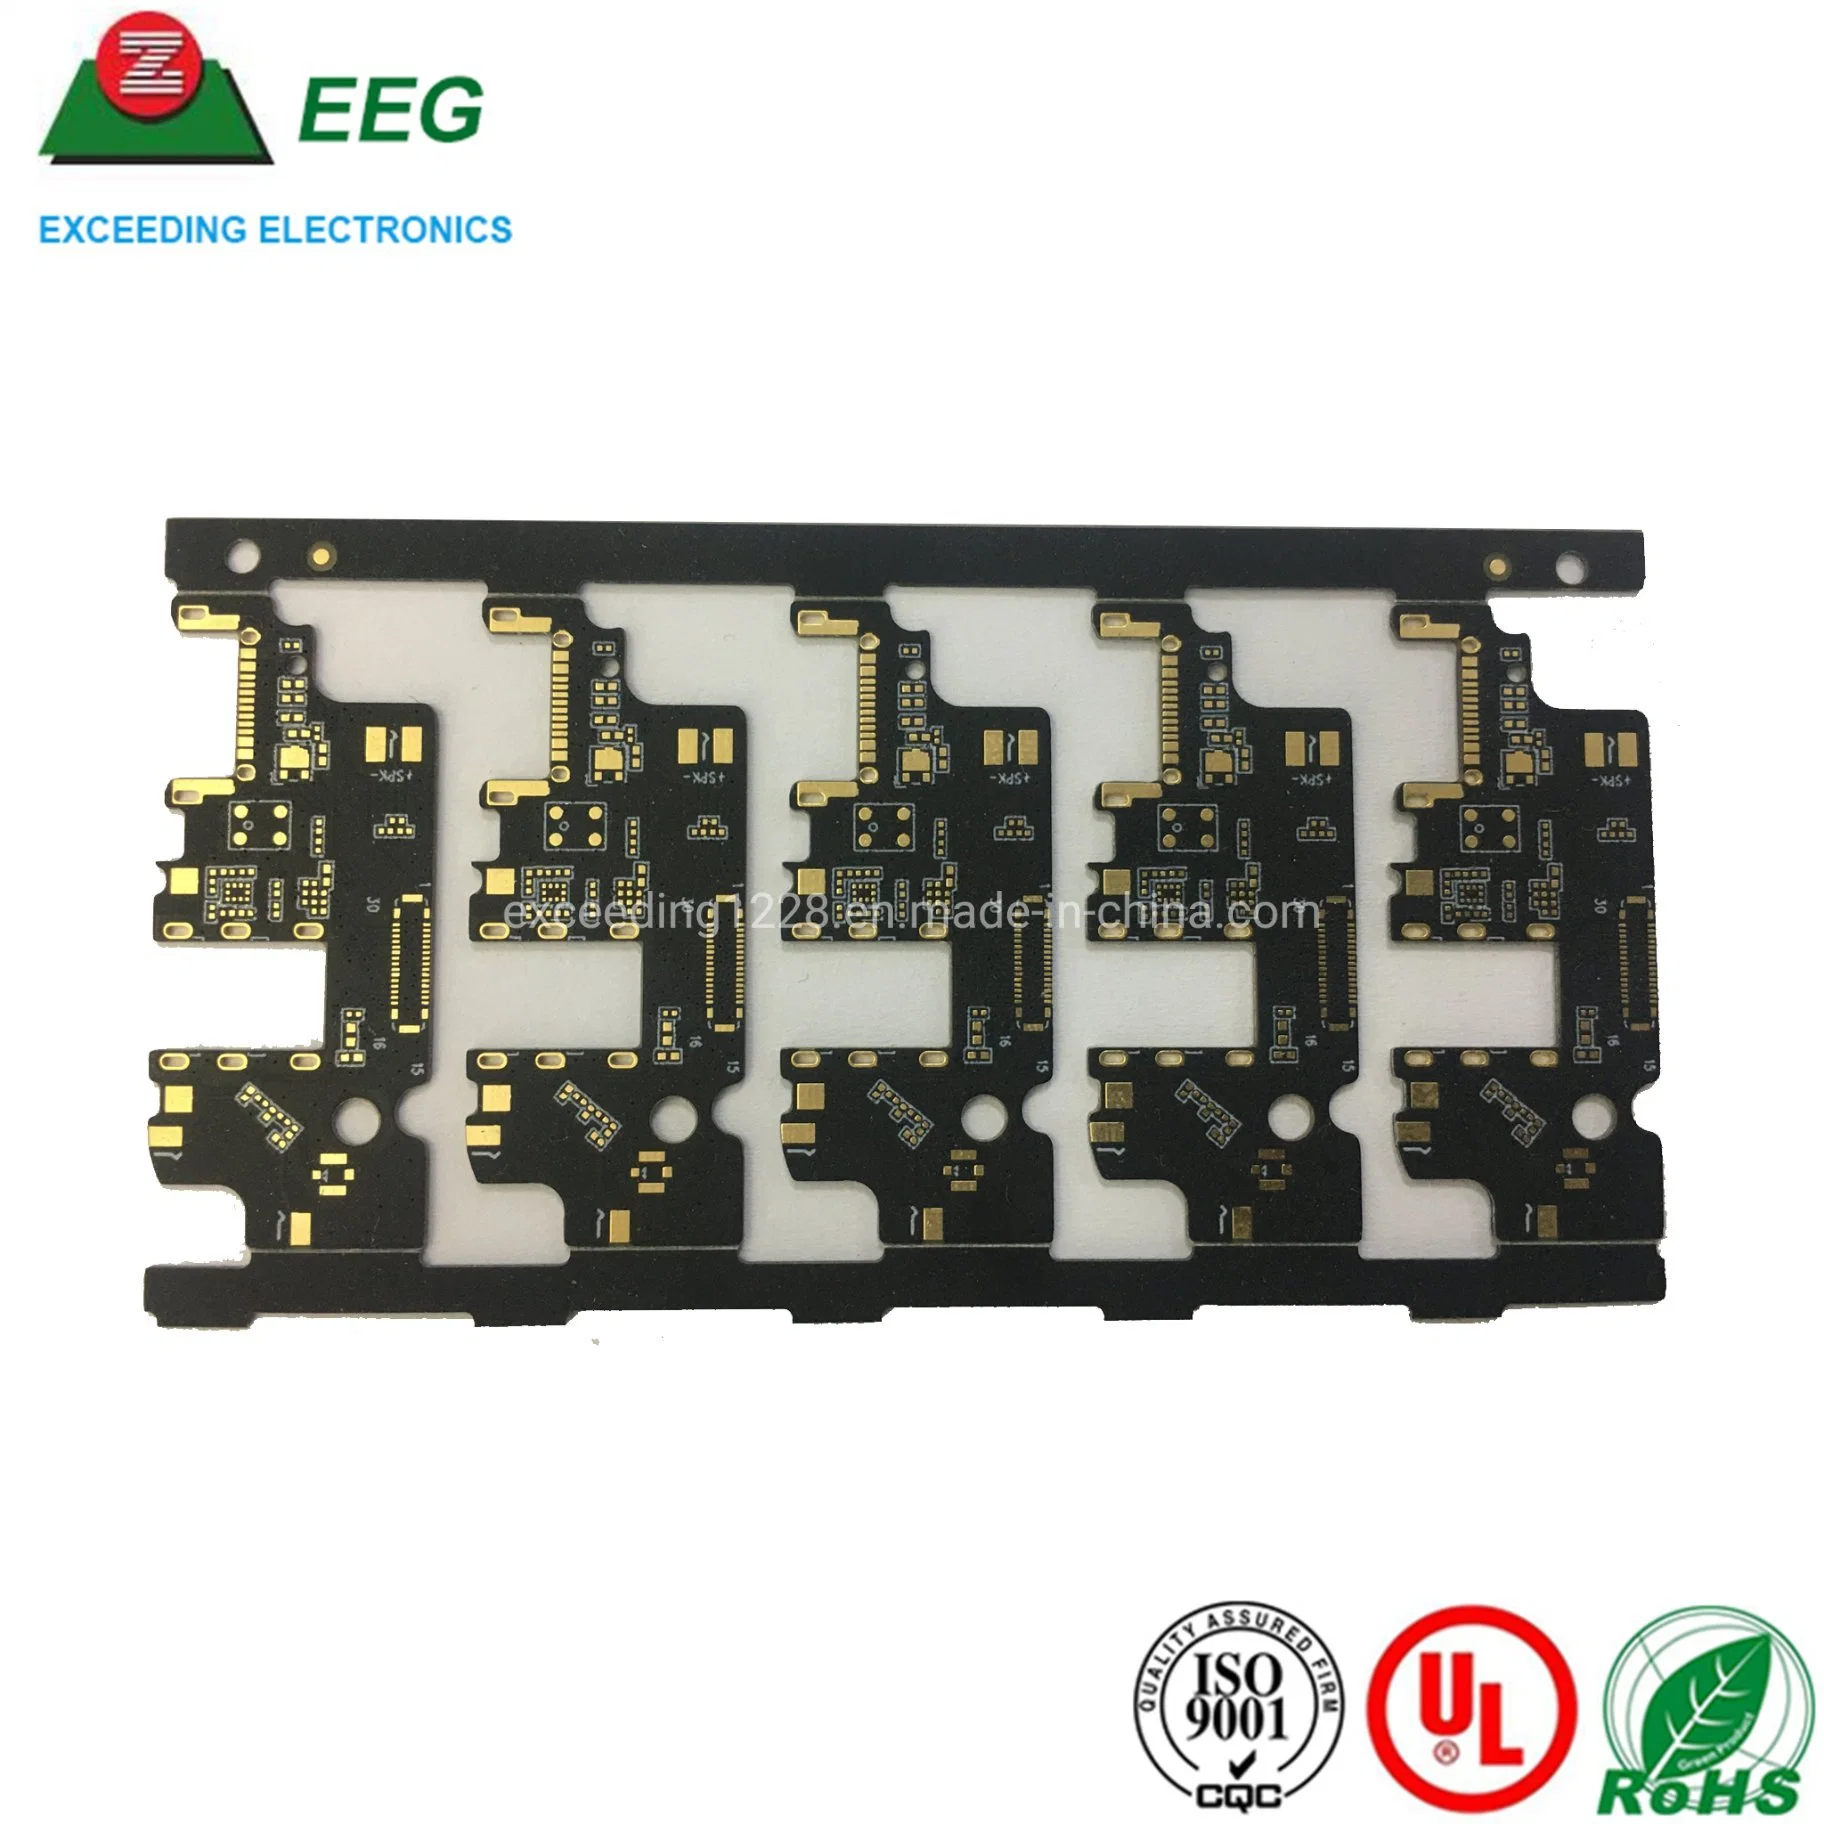 High Precision Circuit Board Multilayer PCB for Electronic